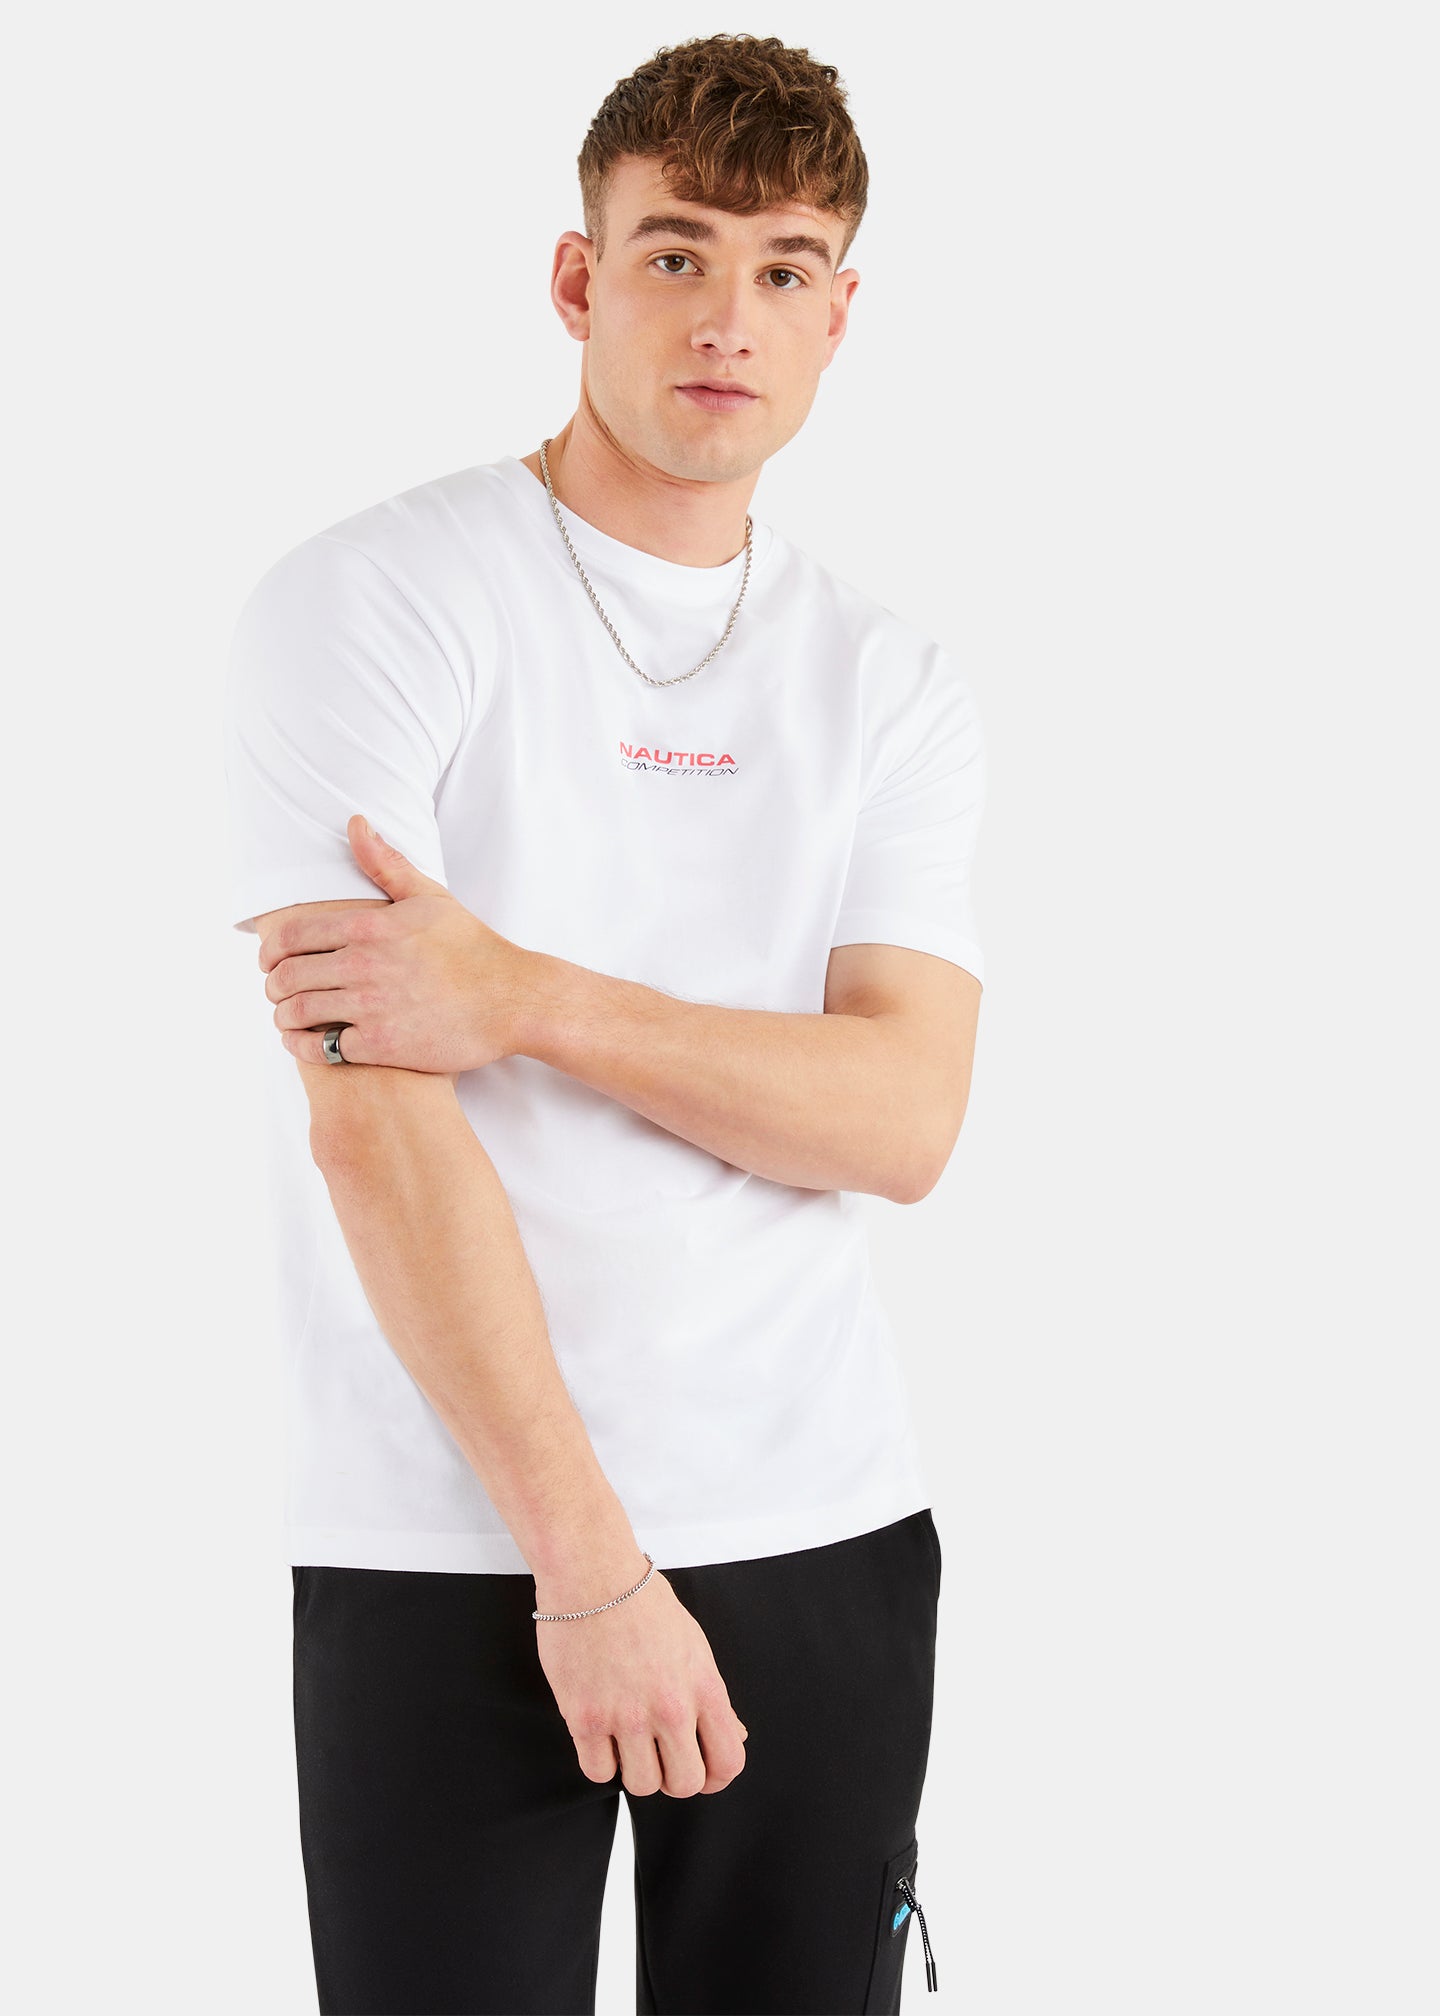 Nautica Competition Shane T-Shirt - White - Front